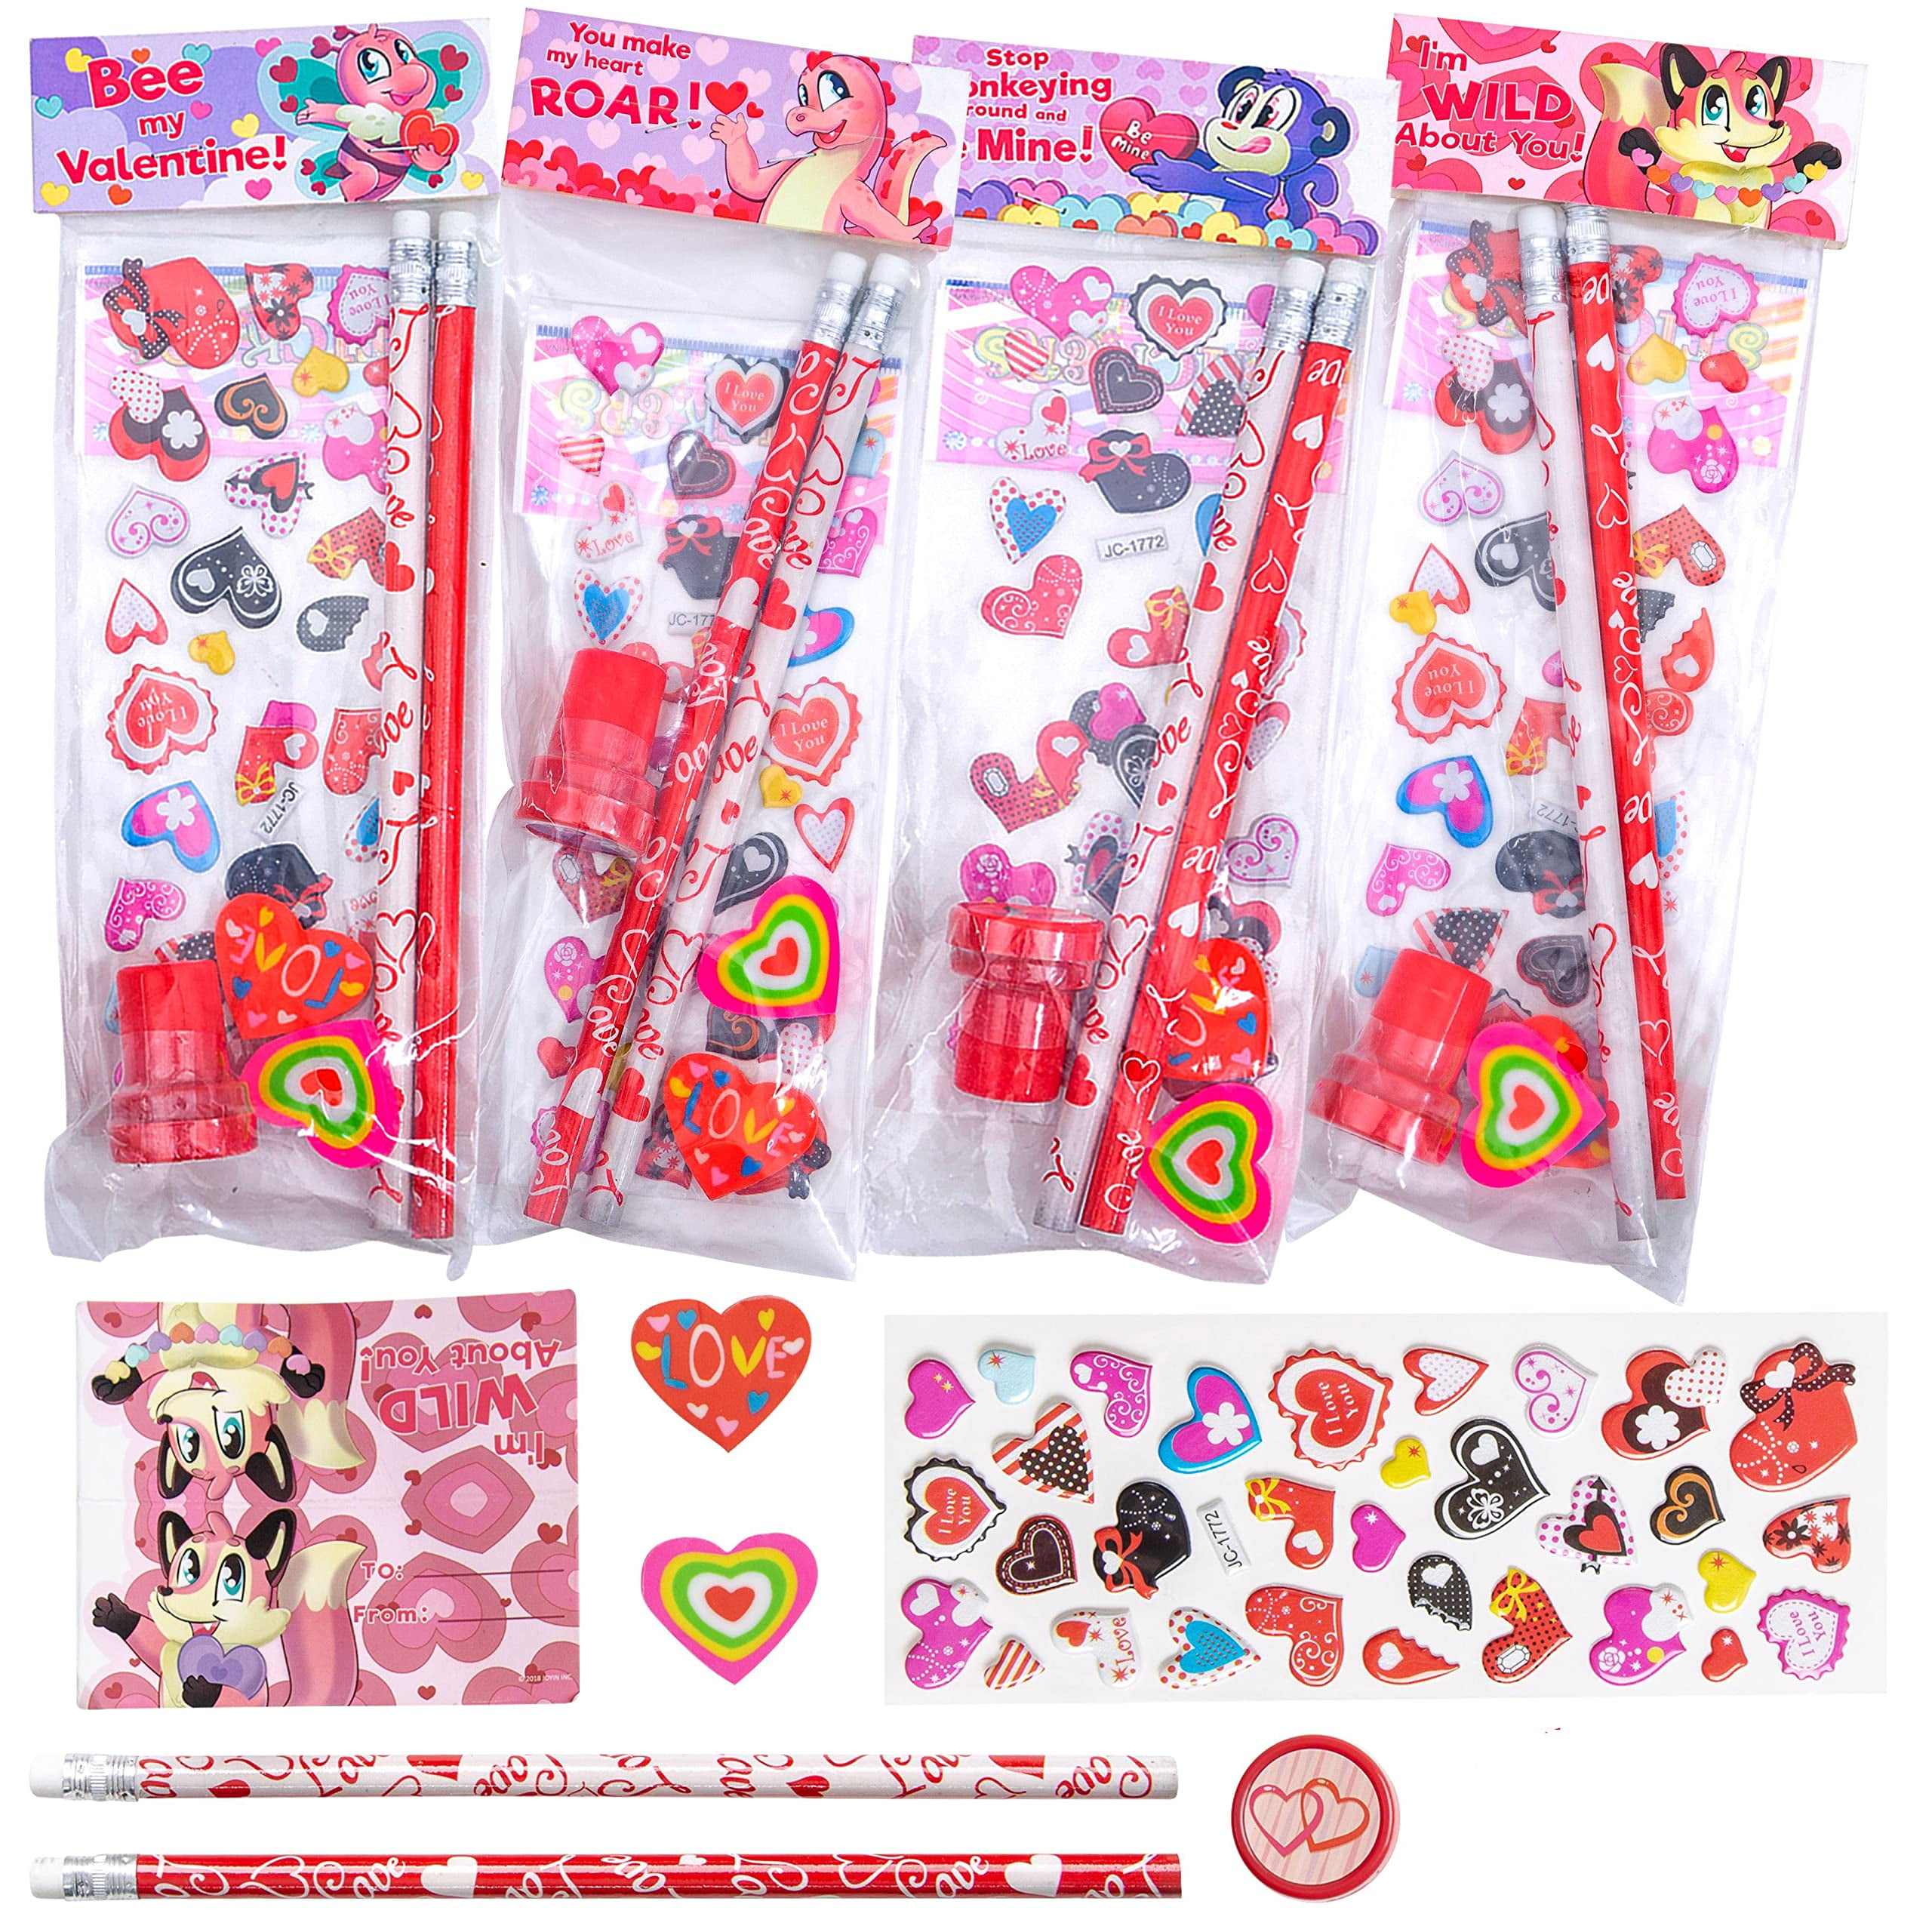 WOONOO 30 Pack Valentines Day Gifts for Kids Classroom Valentines Stationery Set - Valentine Pencils Notepads Rulers Erasers Valentines Treat Bags